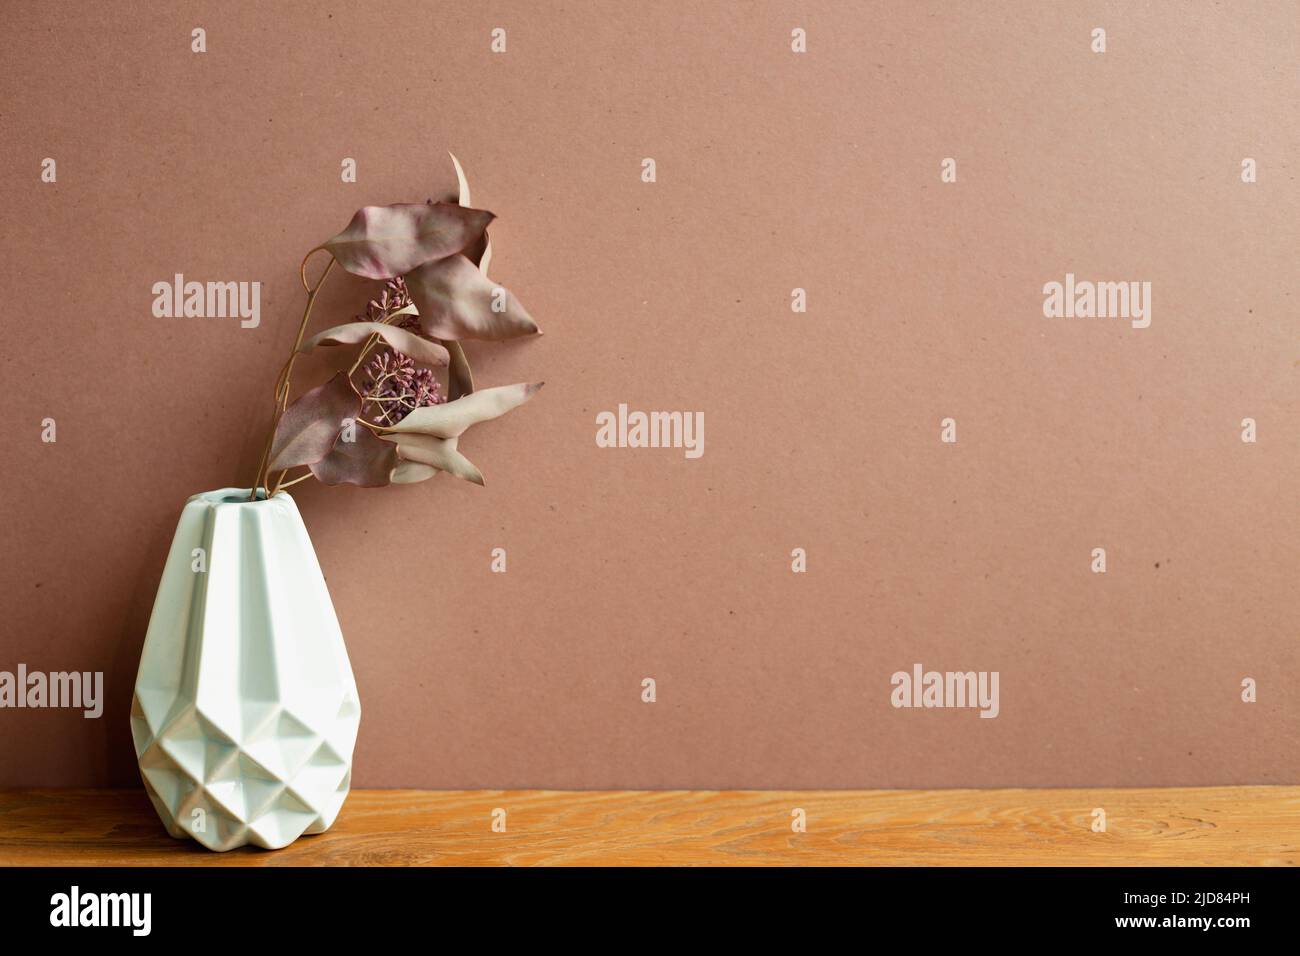 Vase of dry flowers on wooden table. brown wall background. home interior Stock Photo